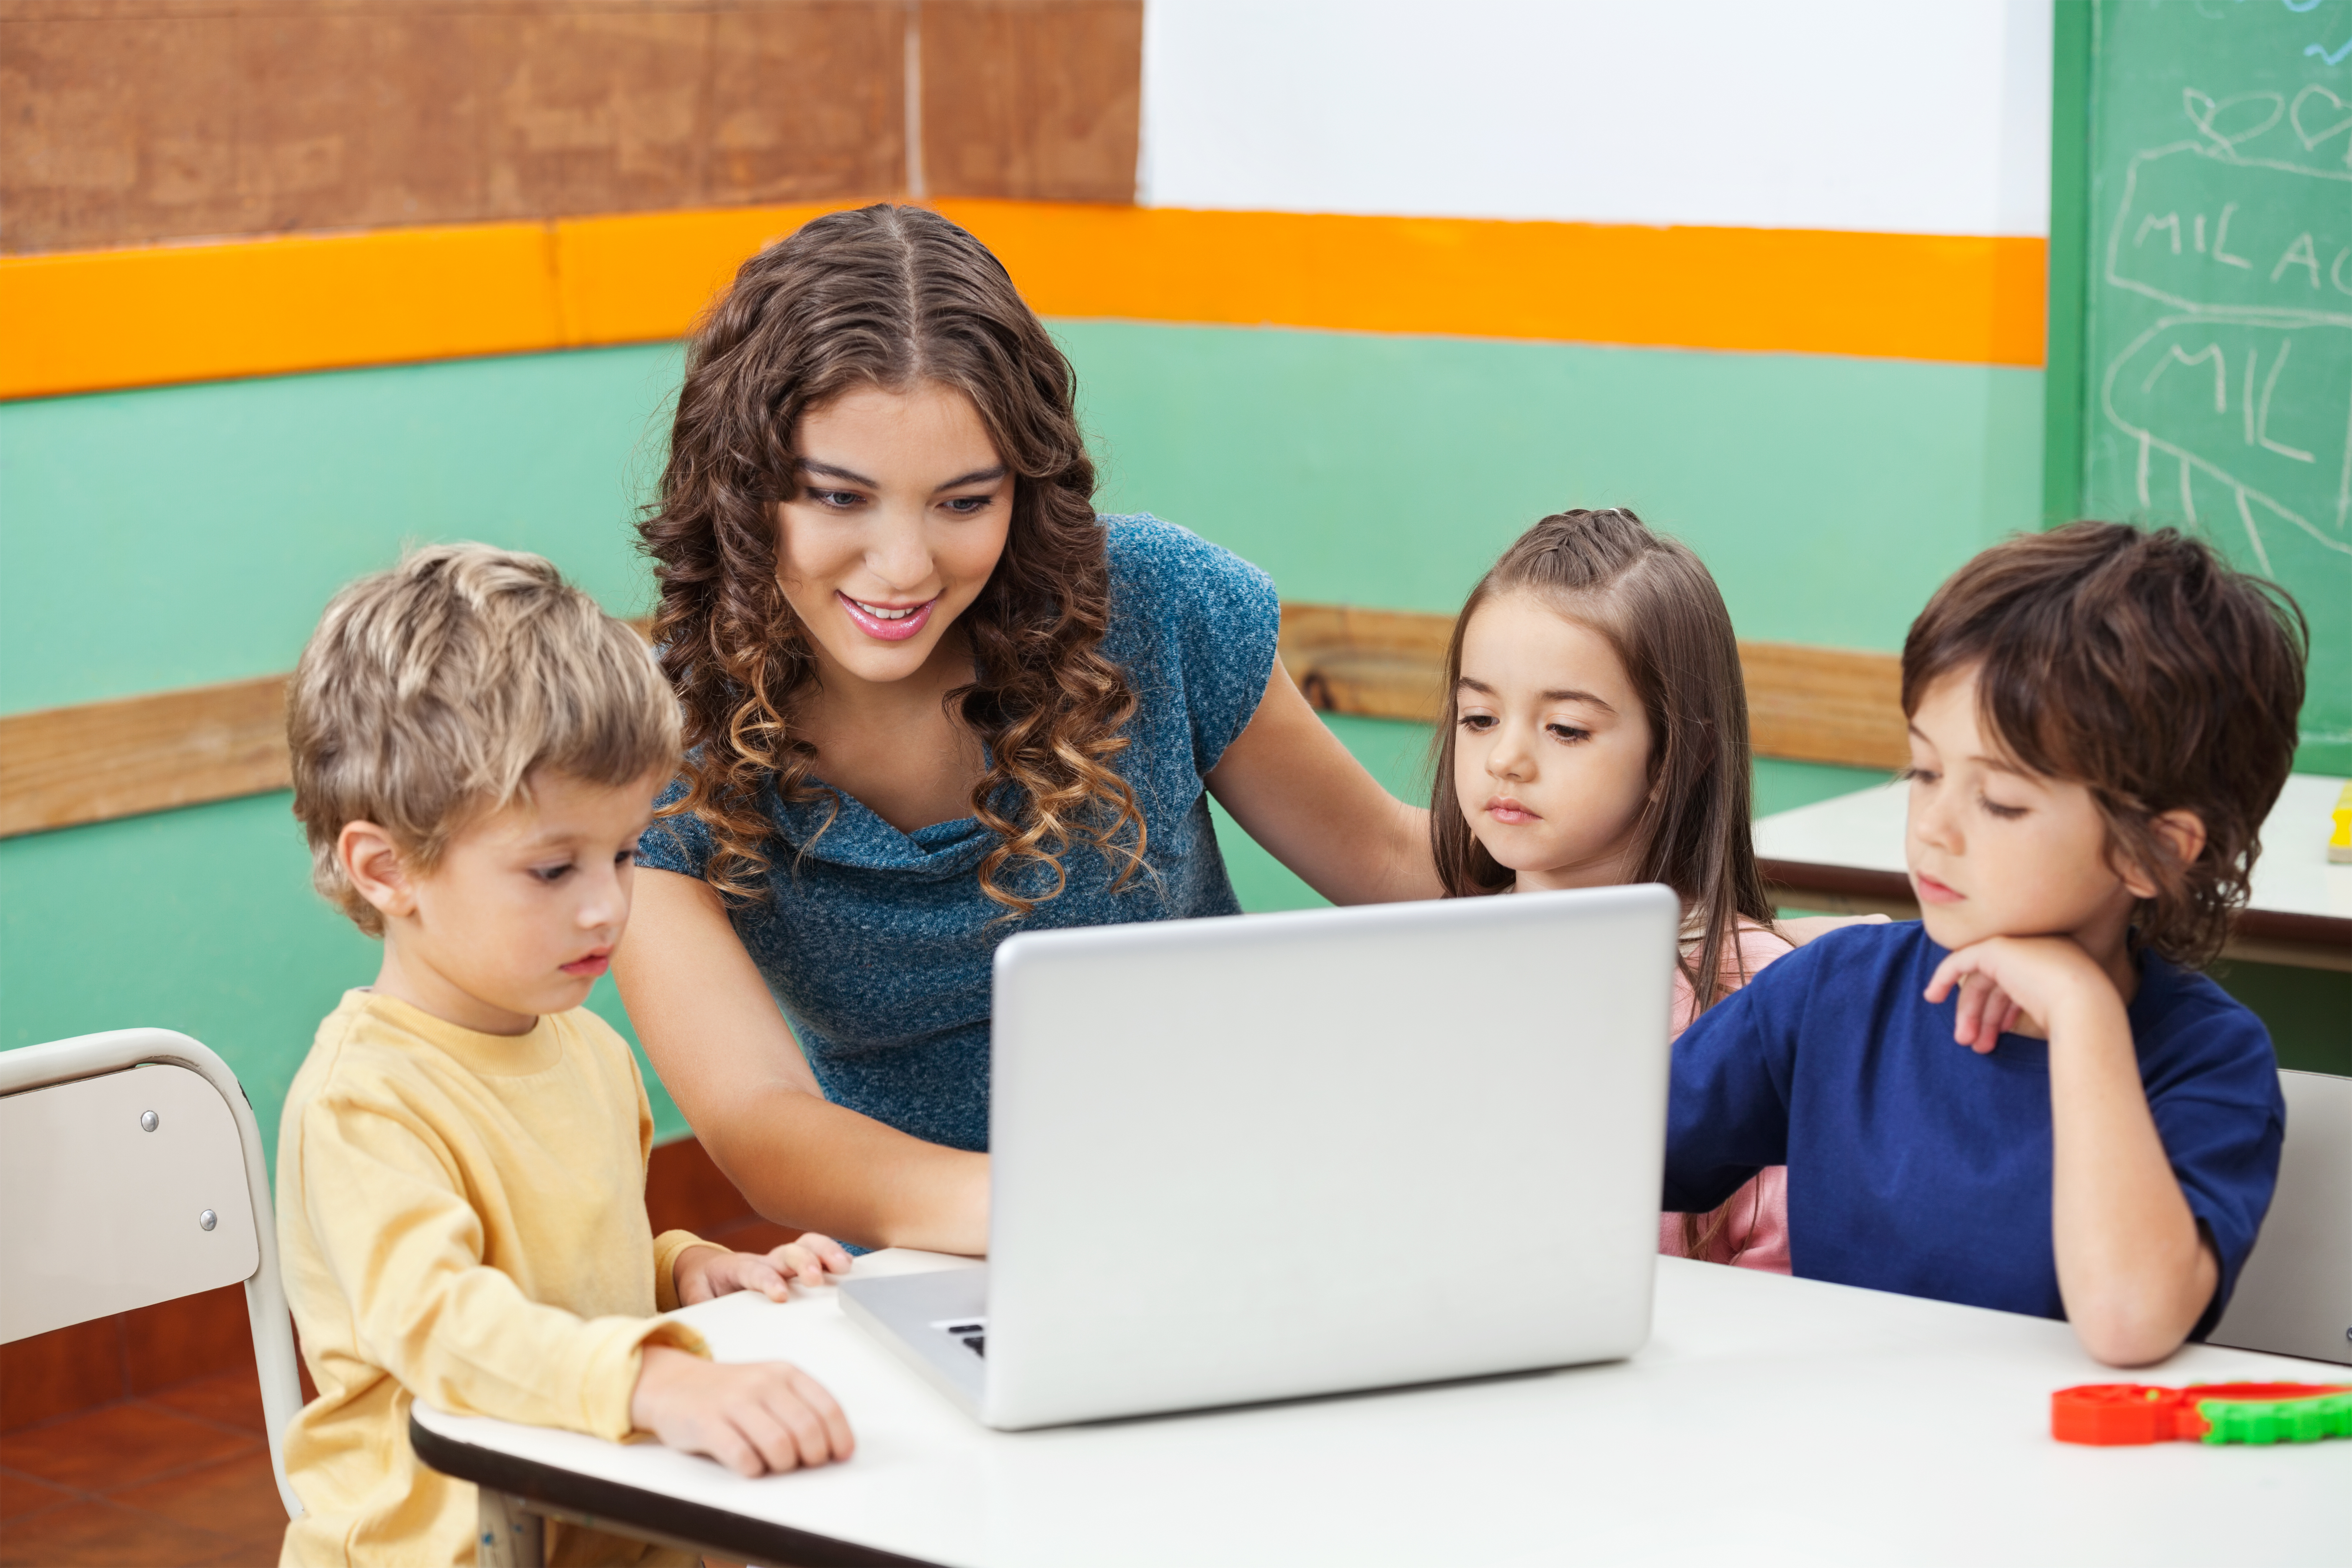 The Use of Technology in Early Childhood Classrooms